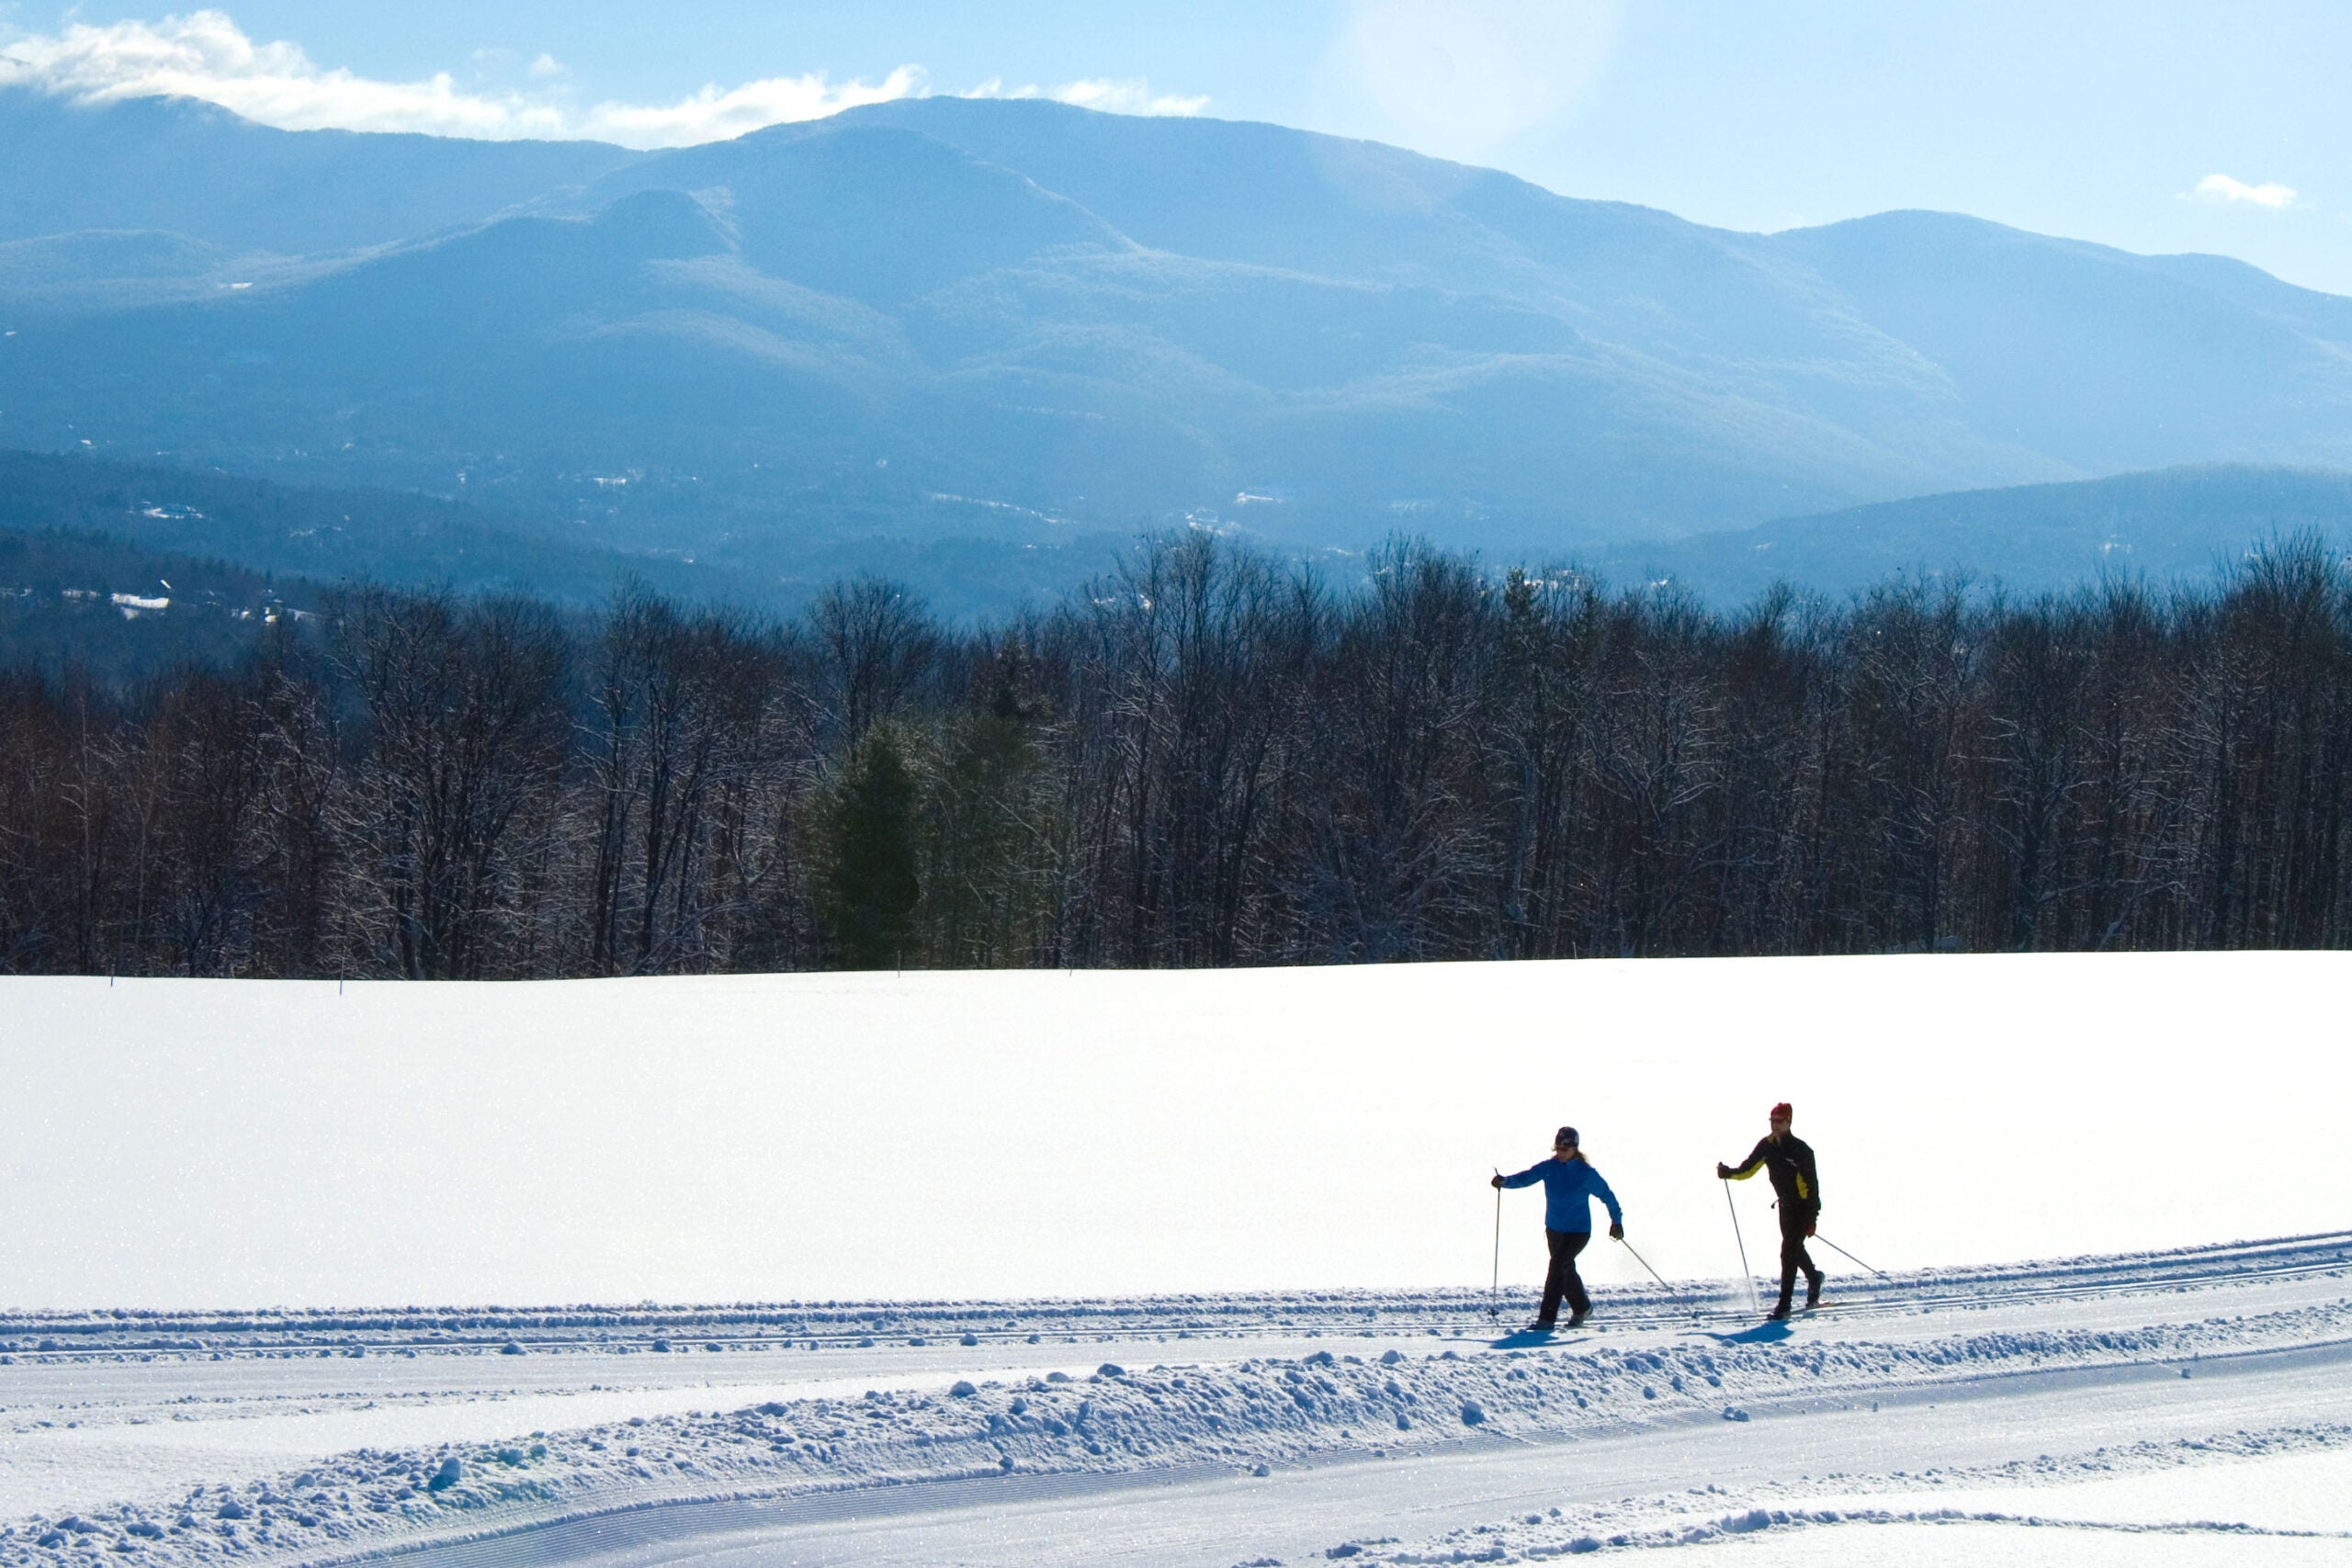 Skiing at the Trapp Family Lodge